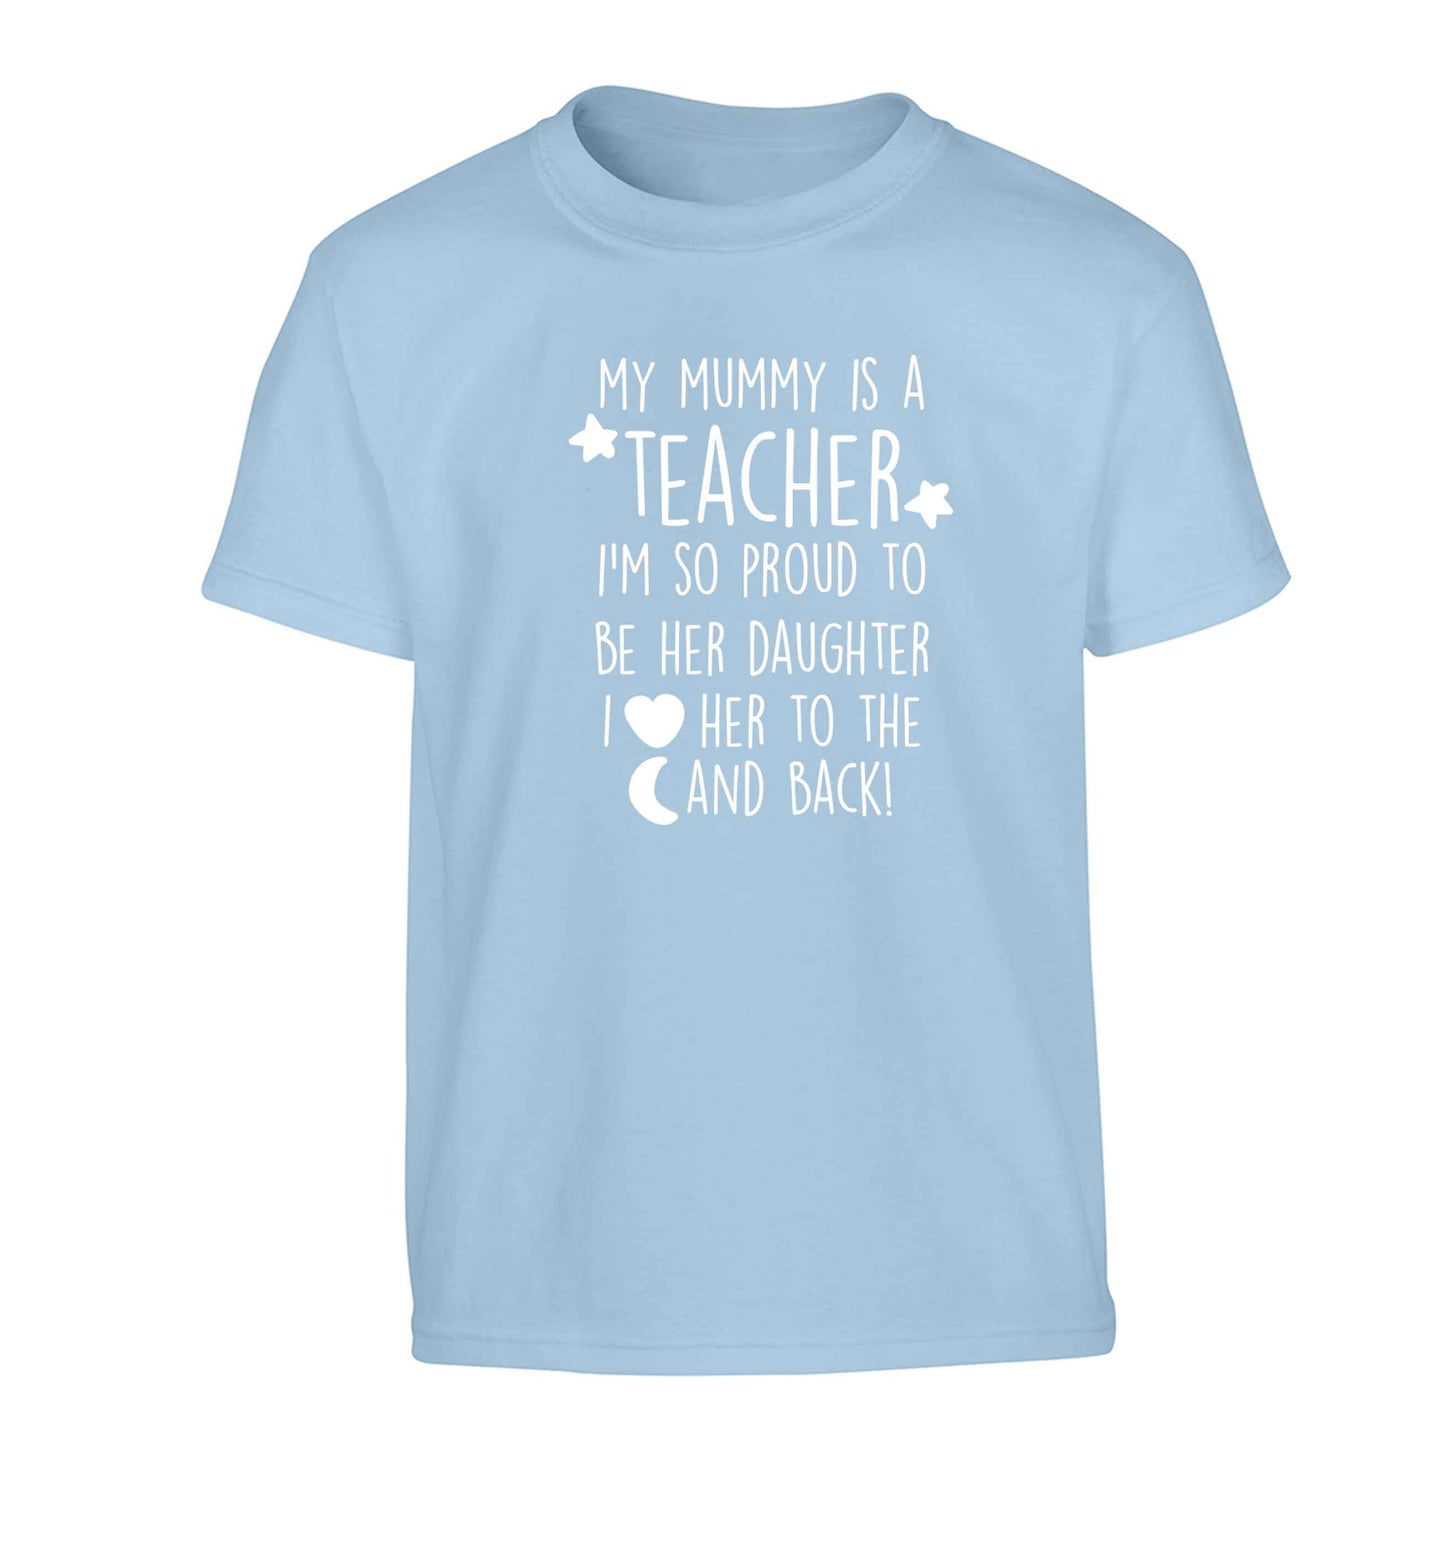 My mummy is a teacher I'm so proud to be her daughter I love her to the moon and back Children's light blue Tshirt 12-13 Years